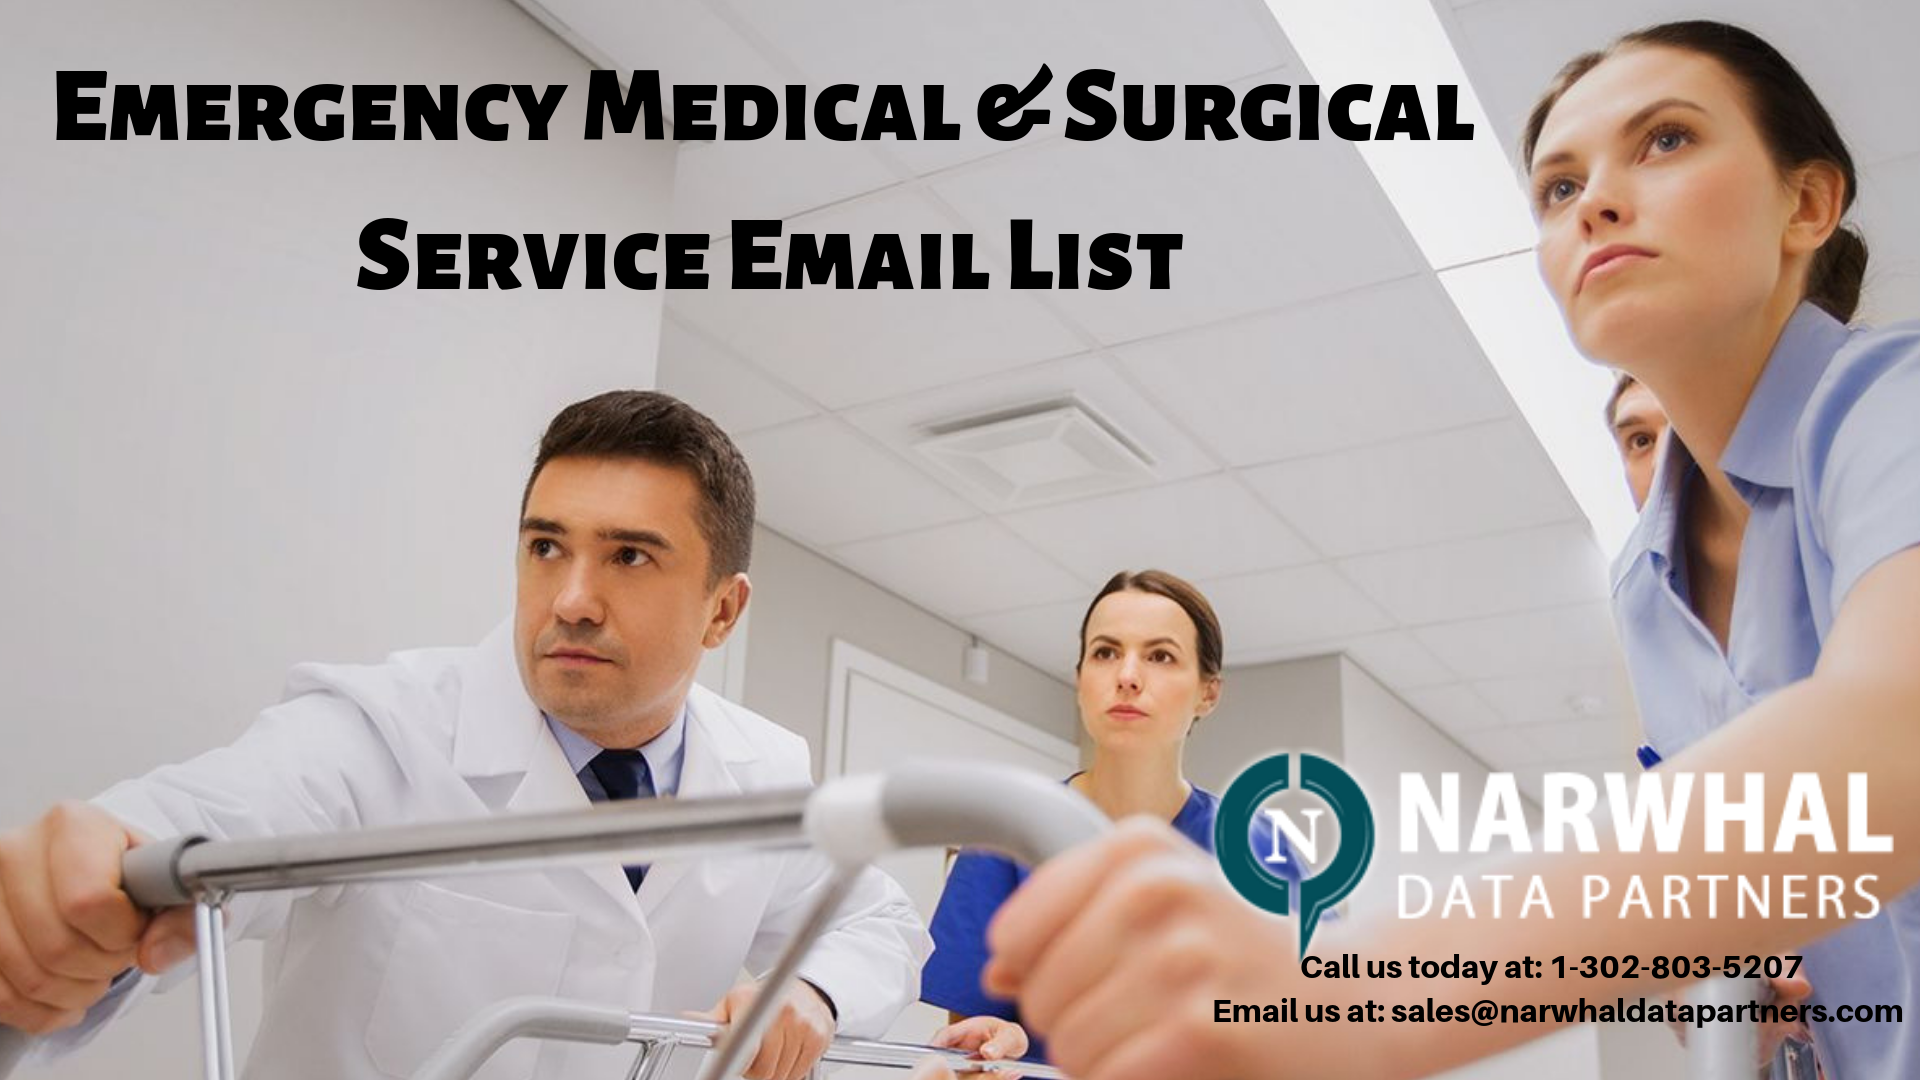 http://narwhaldatapartners.com/emergency-medical-and-surgical-service-email-list.html